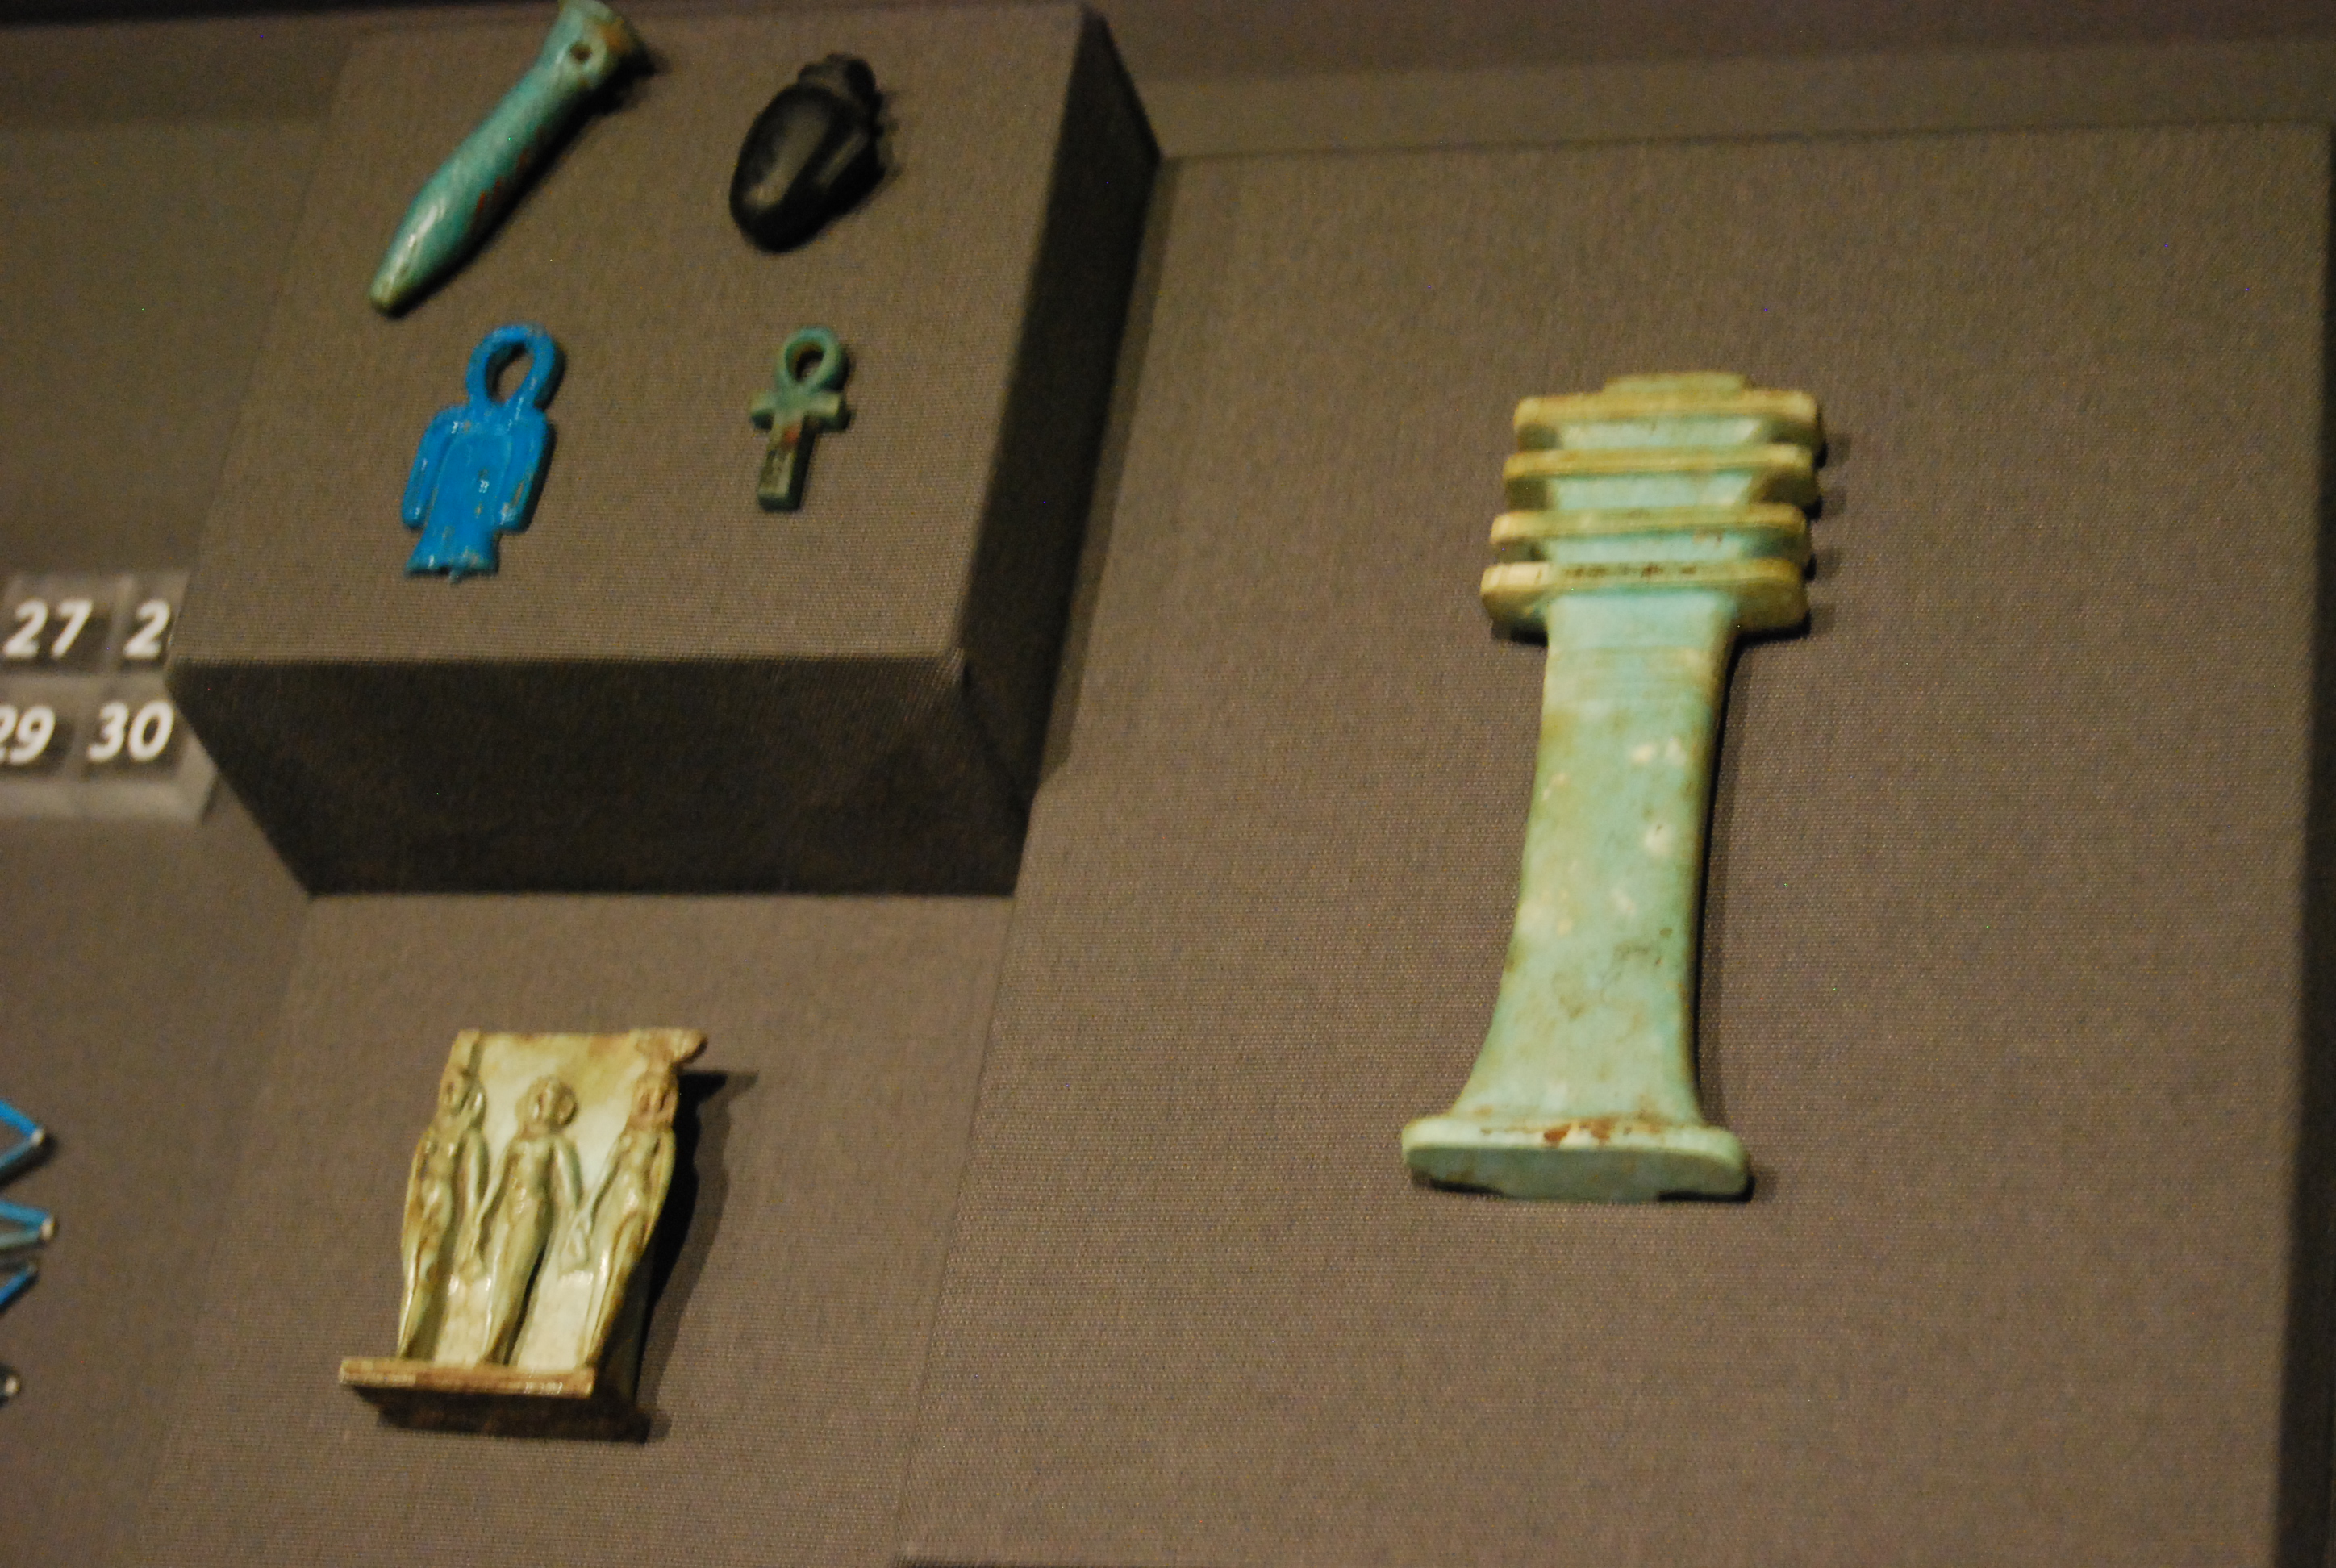 Ancient Egyptian amulets